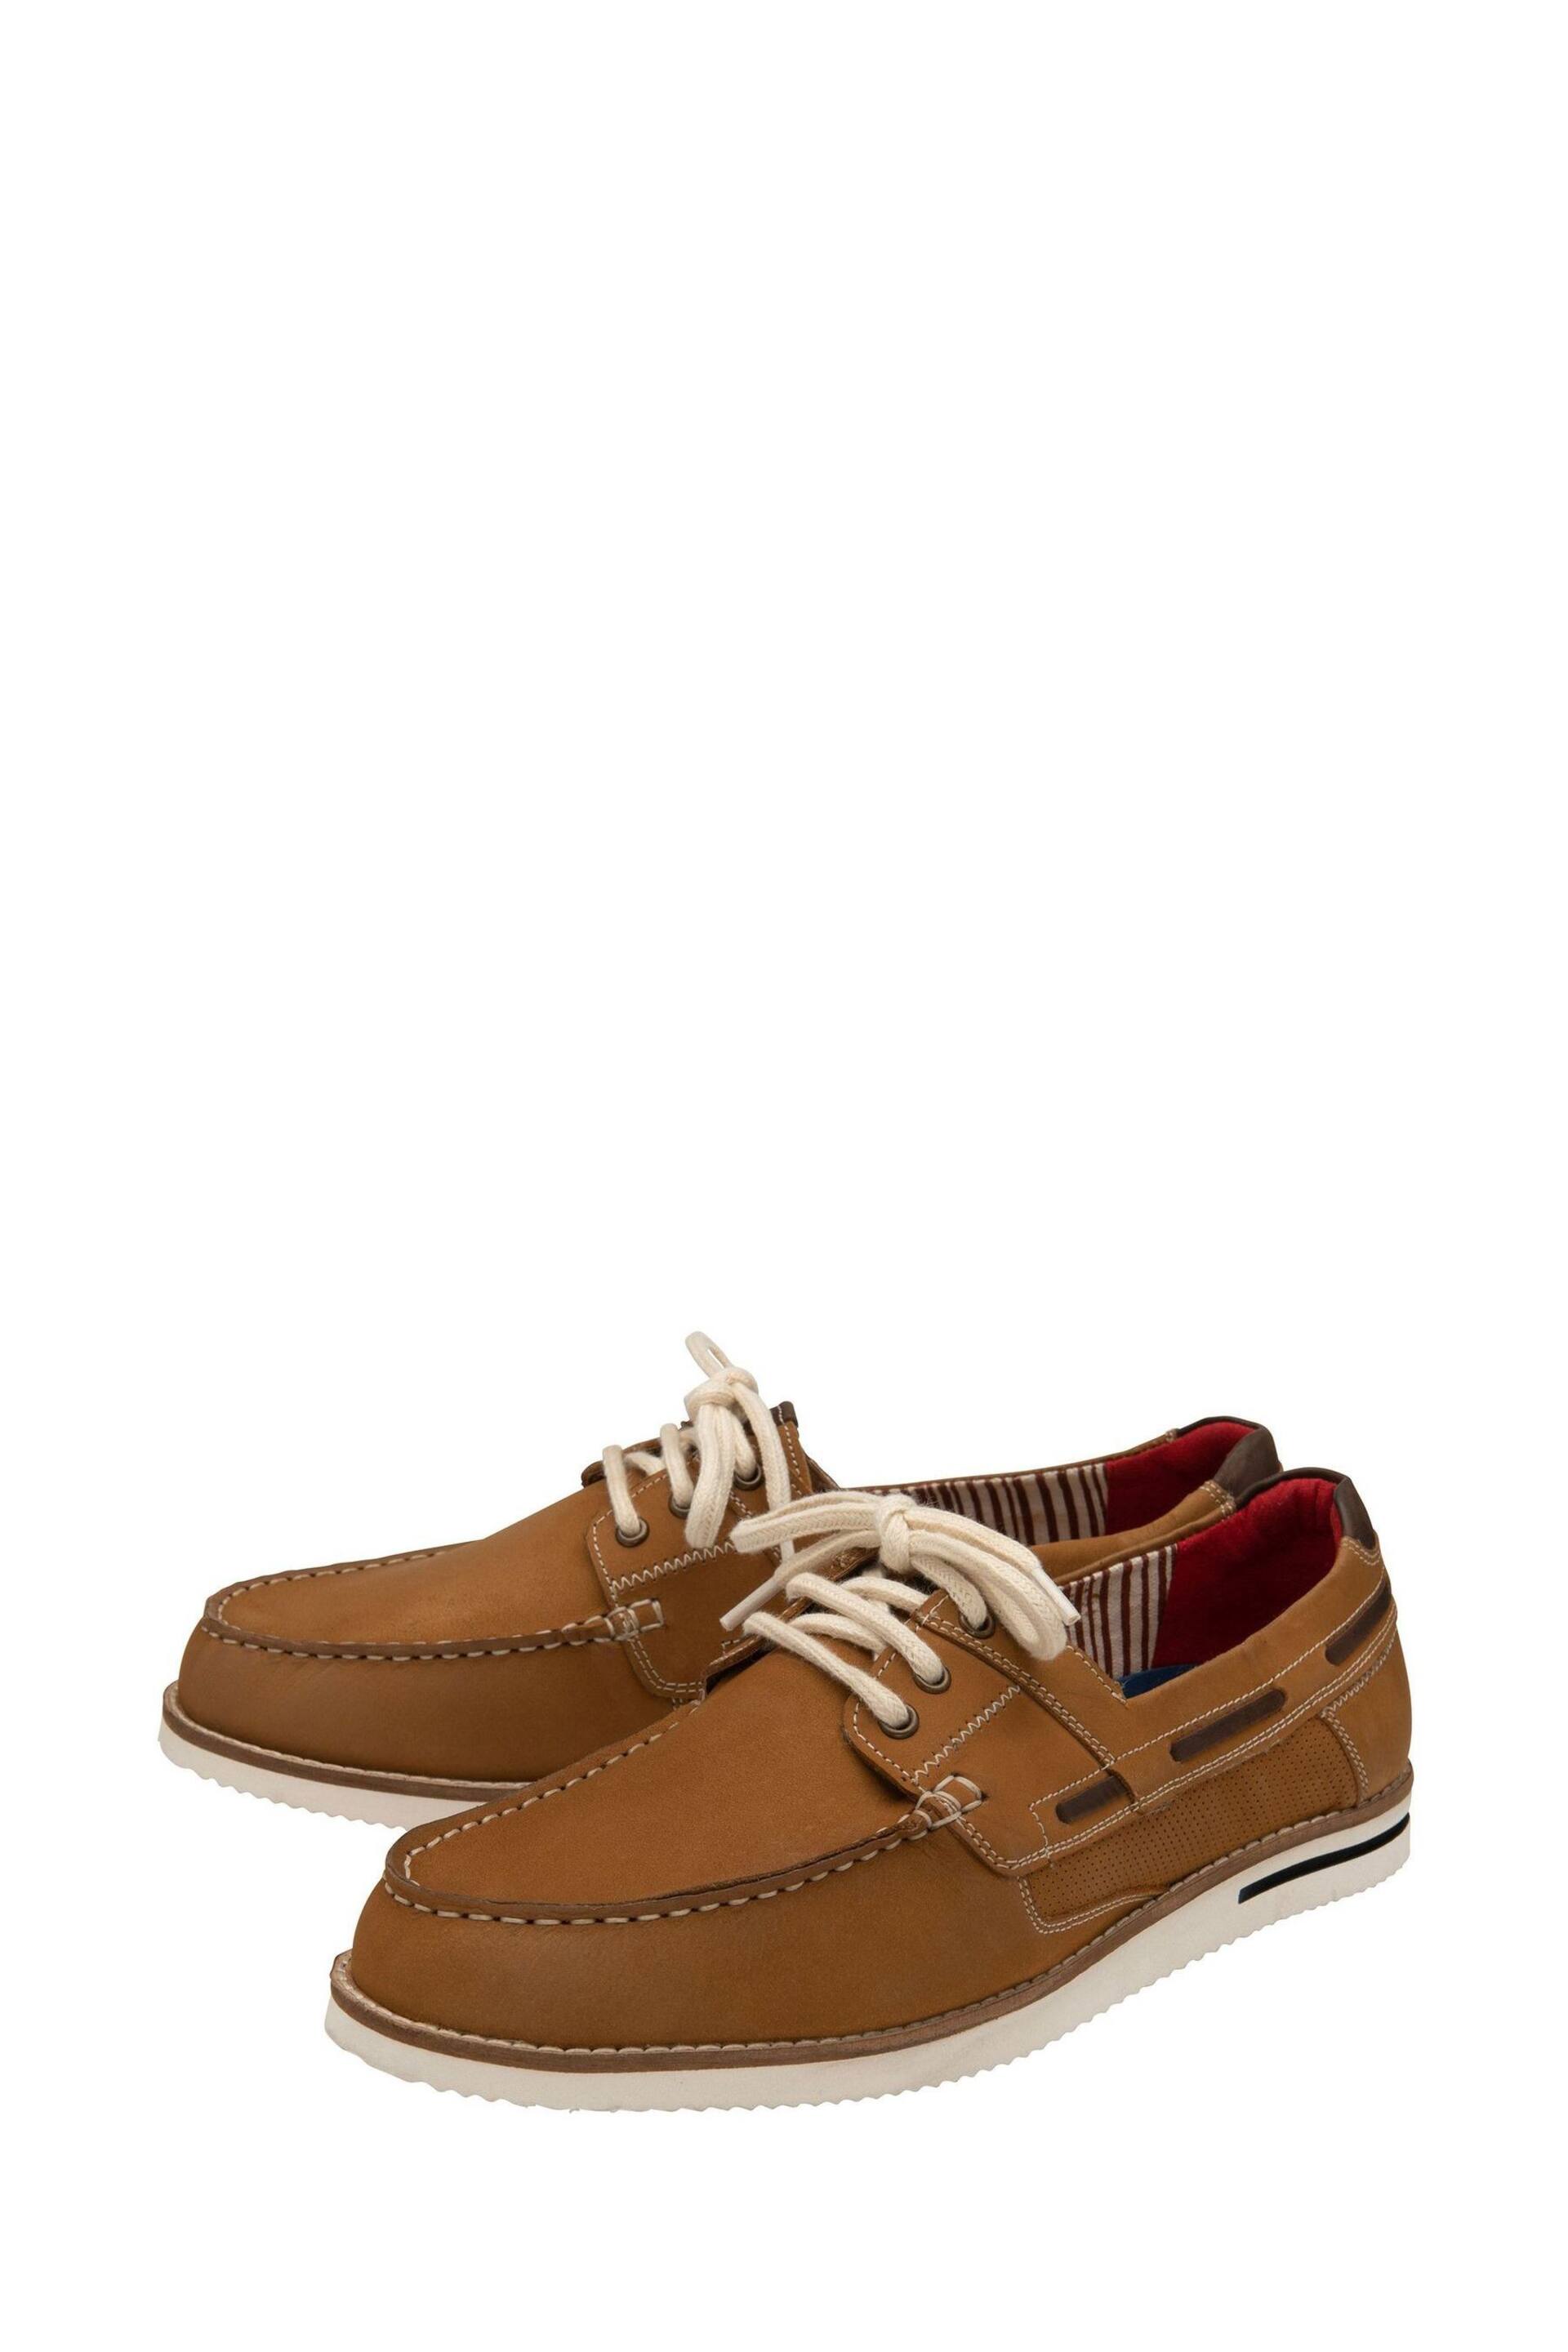 Lotus Brown Leather Boat Shoes - Image 2 of 4